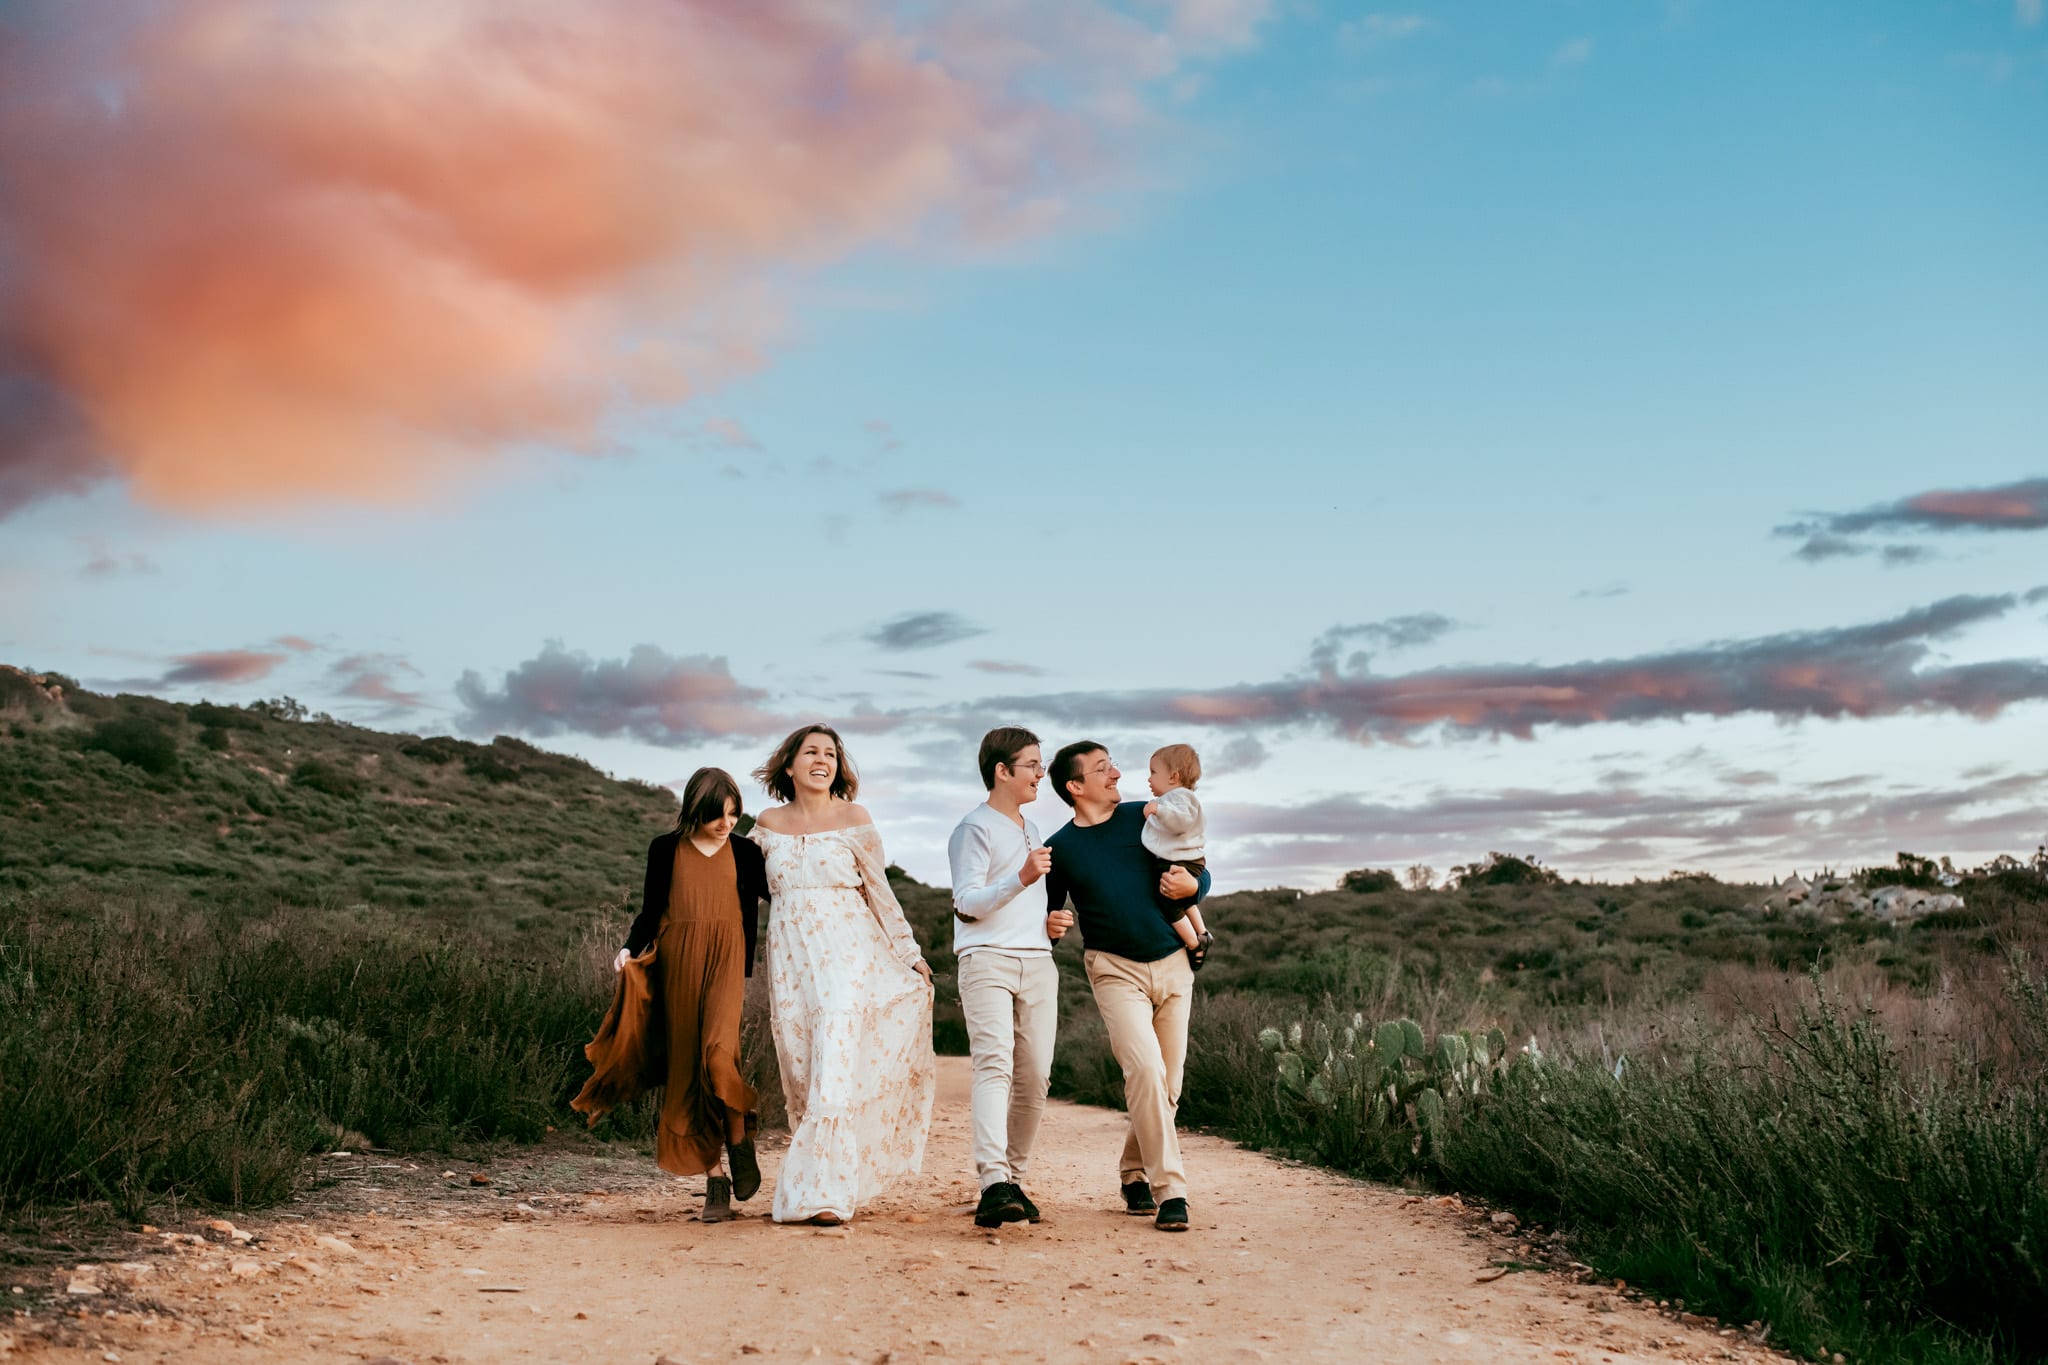 Family of 5 walking together at Lake Hodges taken by Kim Belverud Photography